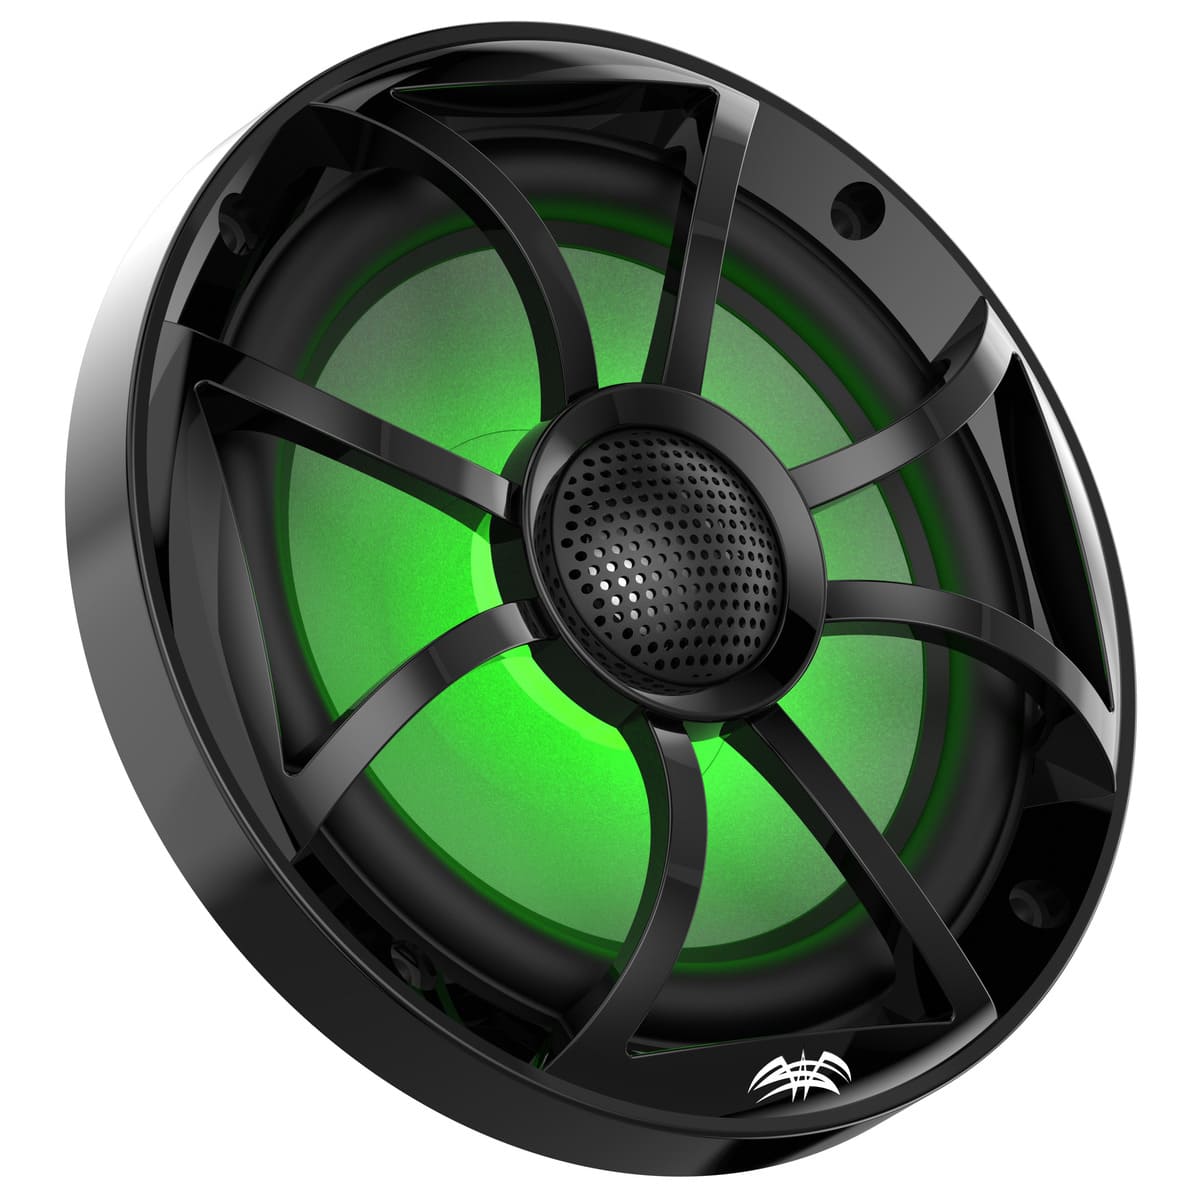 Wet Sounds High Output Component Style 6.5" Marine Coaxial Speakers